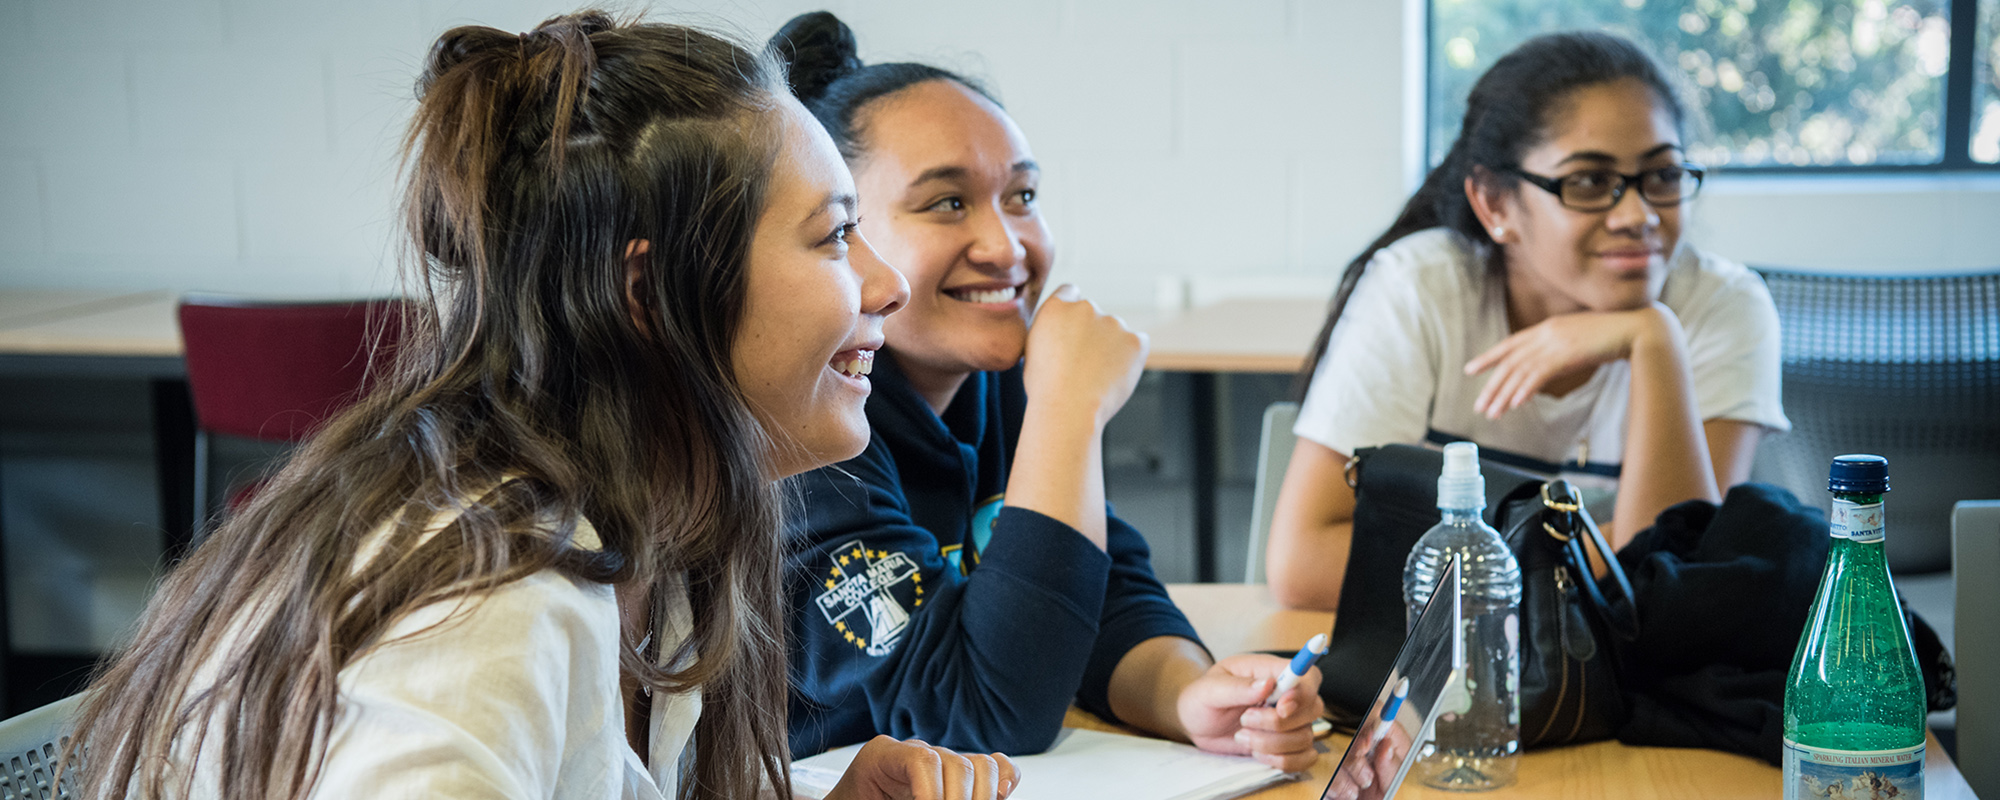 New students – three women smile together at a desk looking at a focal point out of frame.